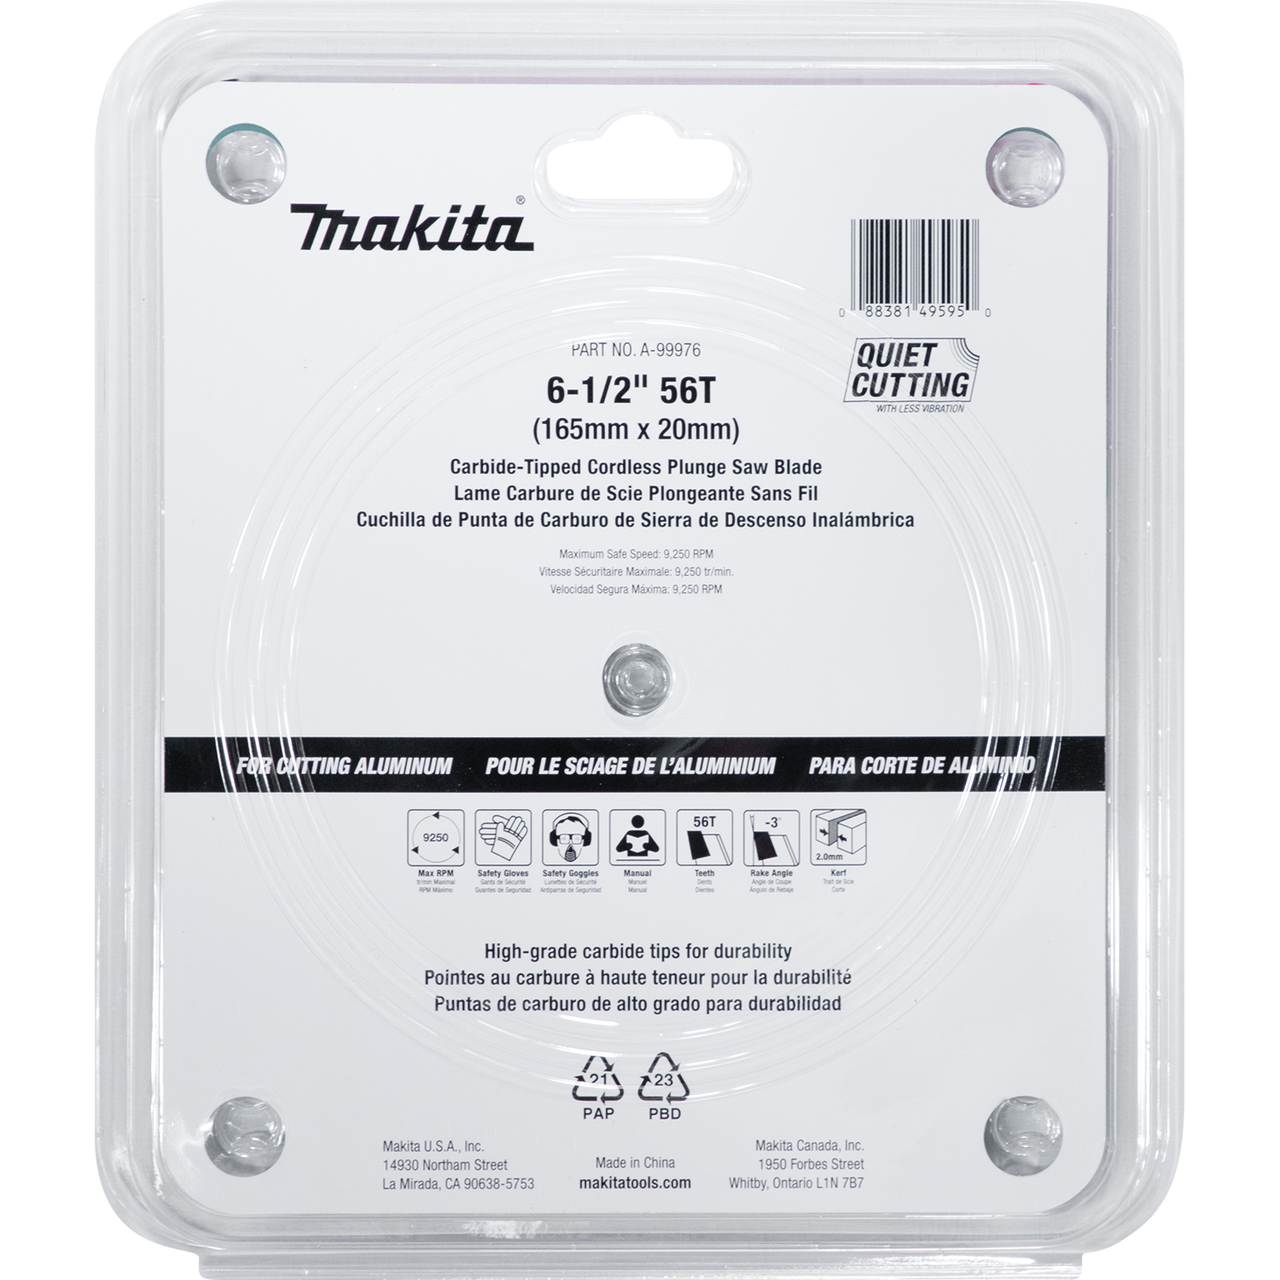 Makita A-99976 6-1 2" 56T Carbide-Tipped Cordless Plunge Saw Blade - 3